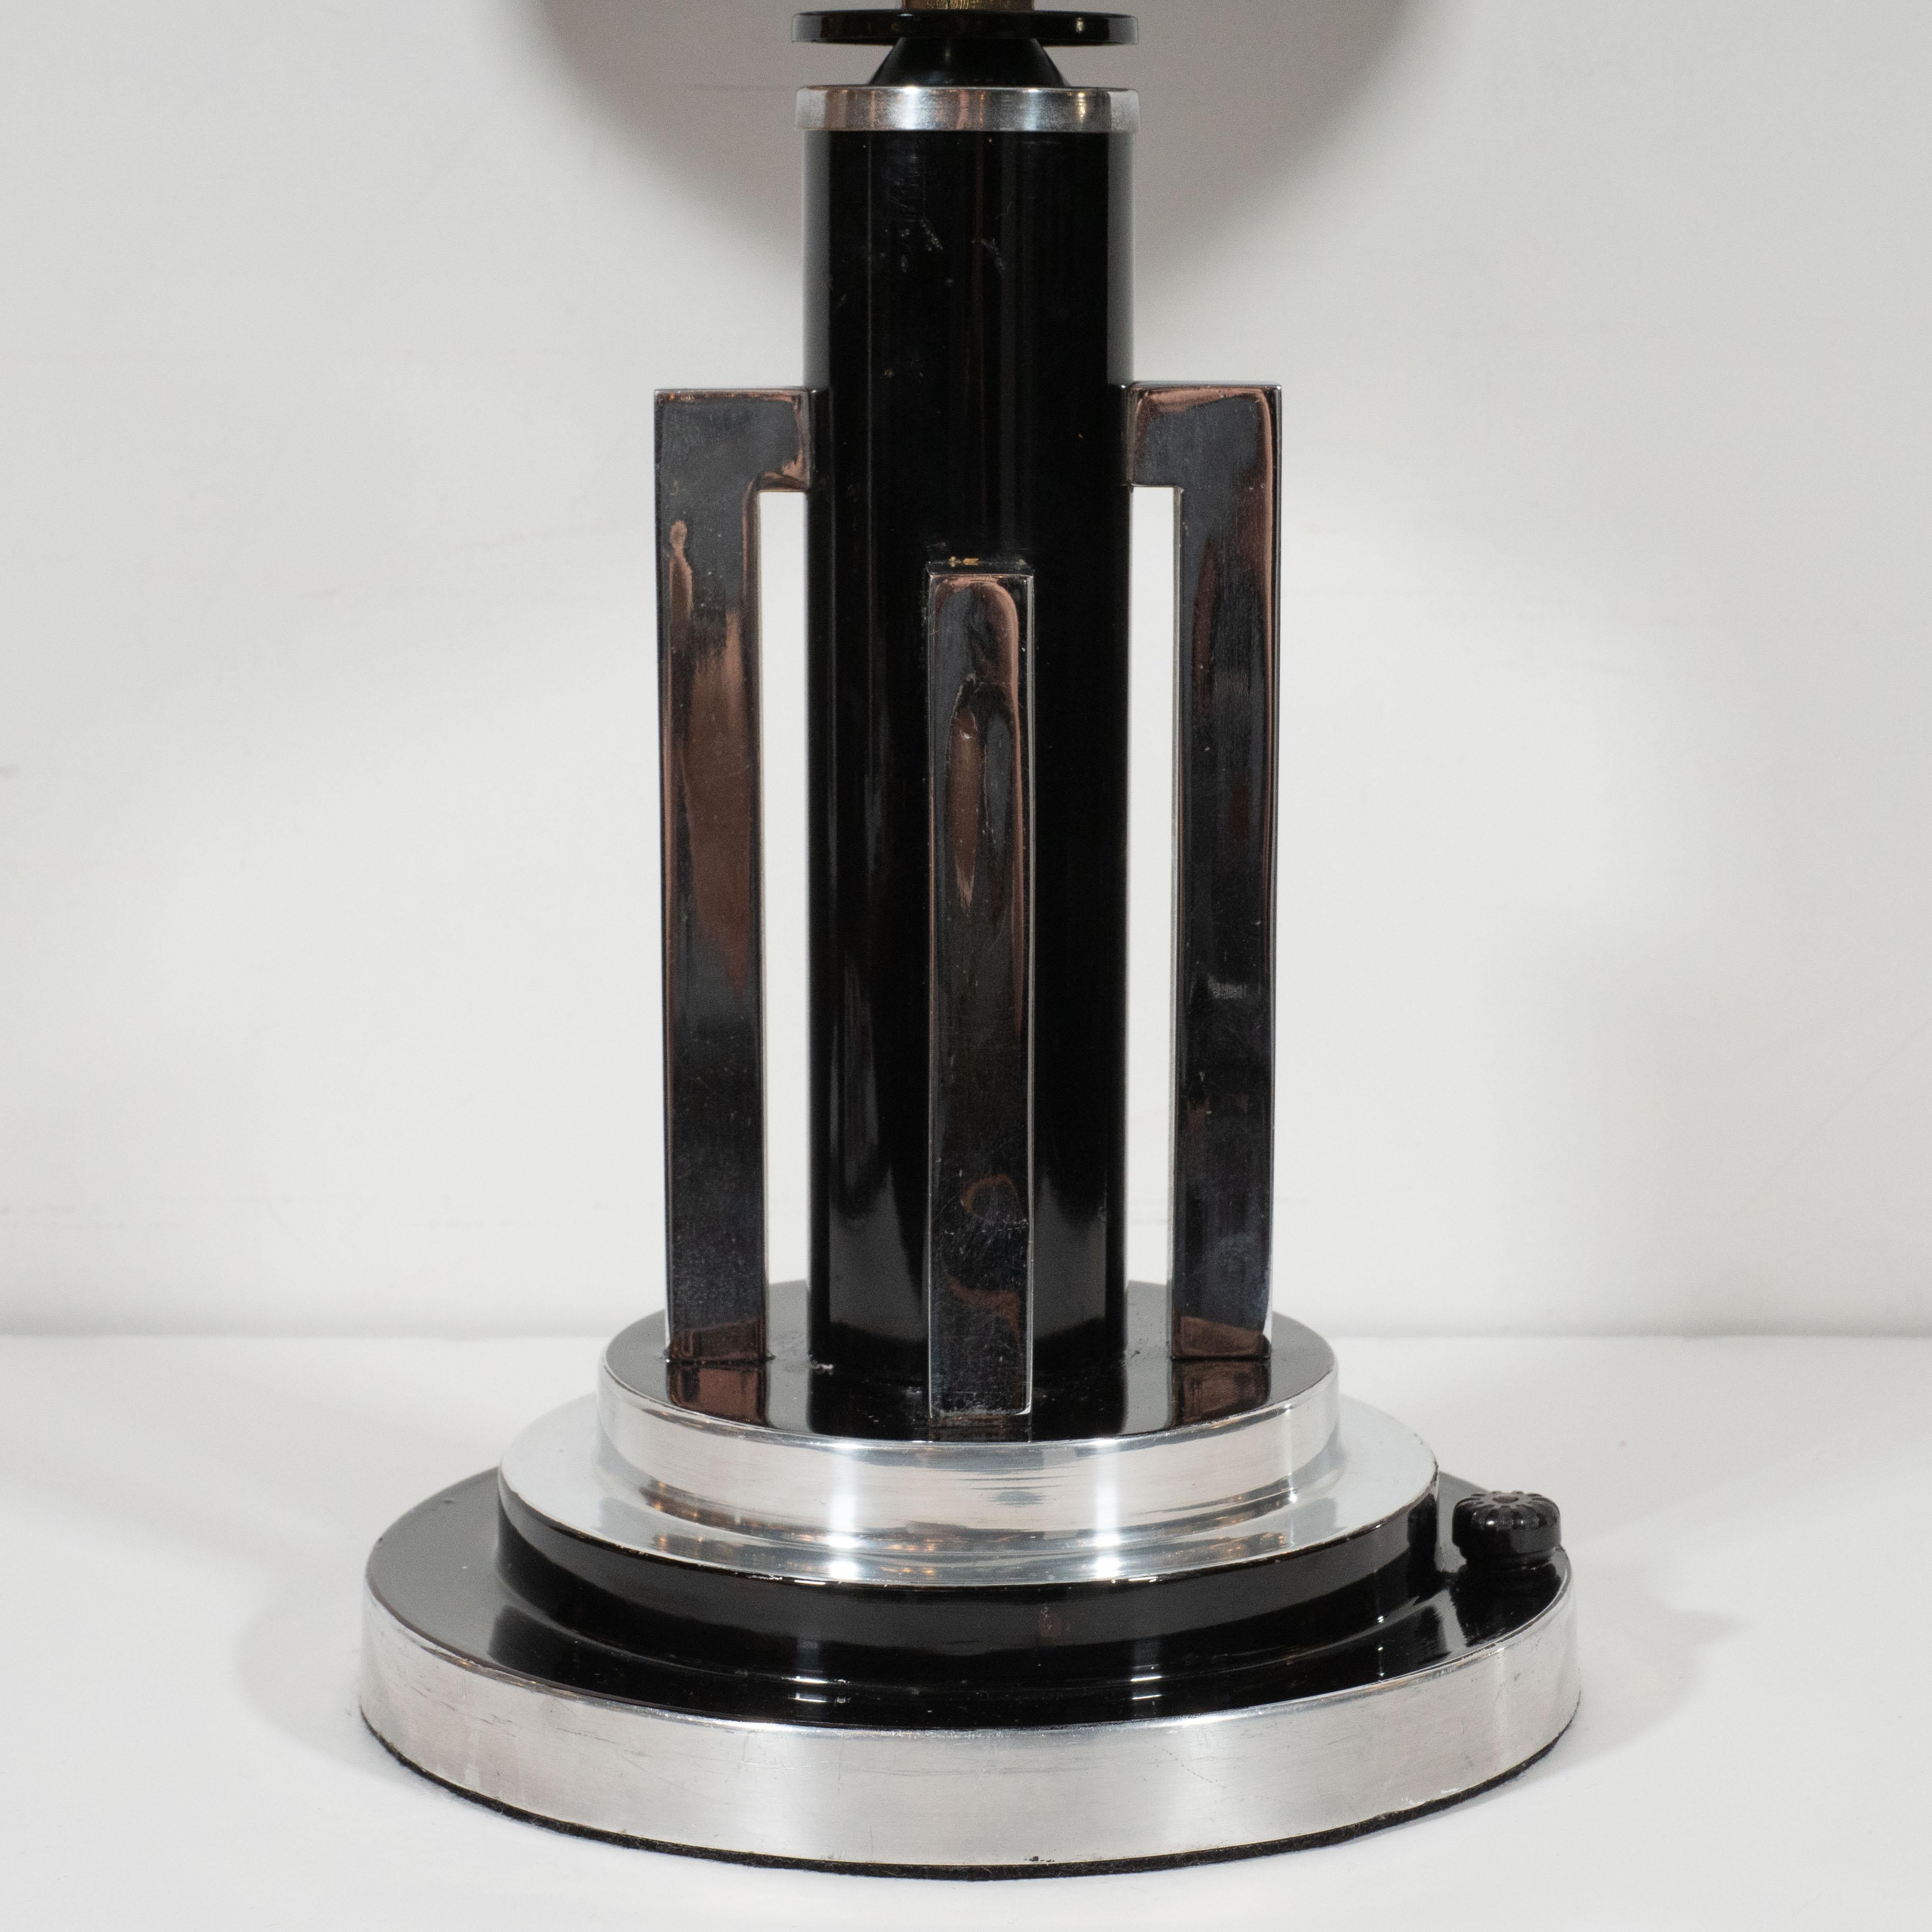 This dramatic and striking table lamp was realized in the United States, circa 1935. It features a skyscraper style base consisting of three concentric circular forms alternating between black lacquer and chrome; a cylindrical black enamel body and